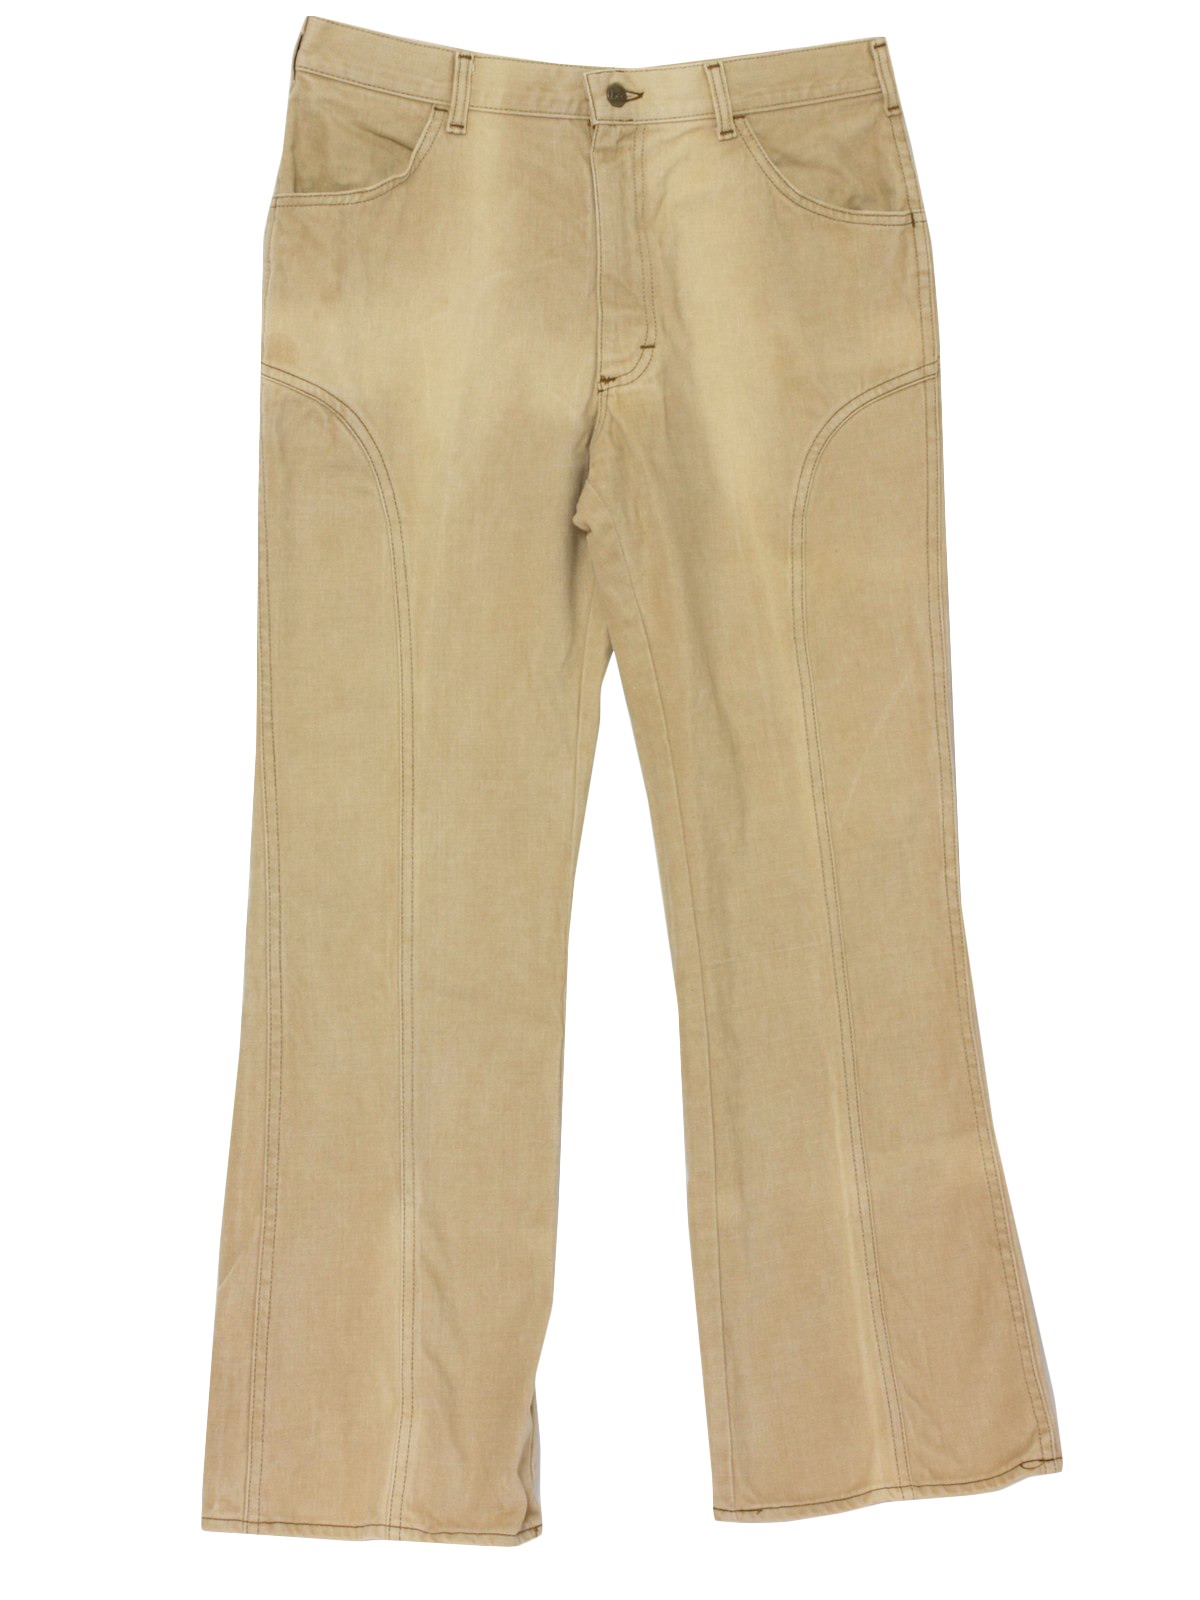 1970's Vintage Lee Pants: Early 80s -Lee- Mens tan solid colored heavy ...